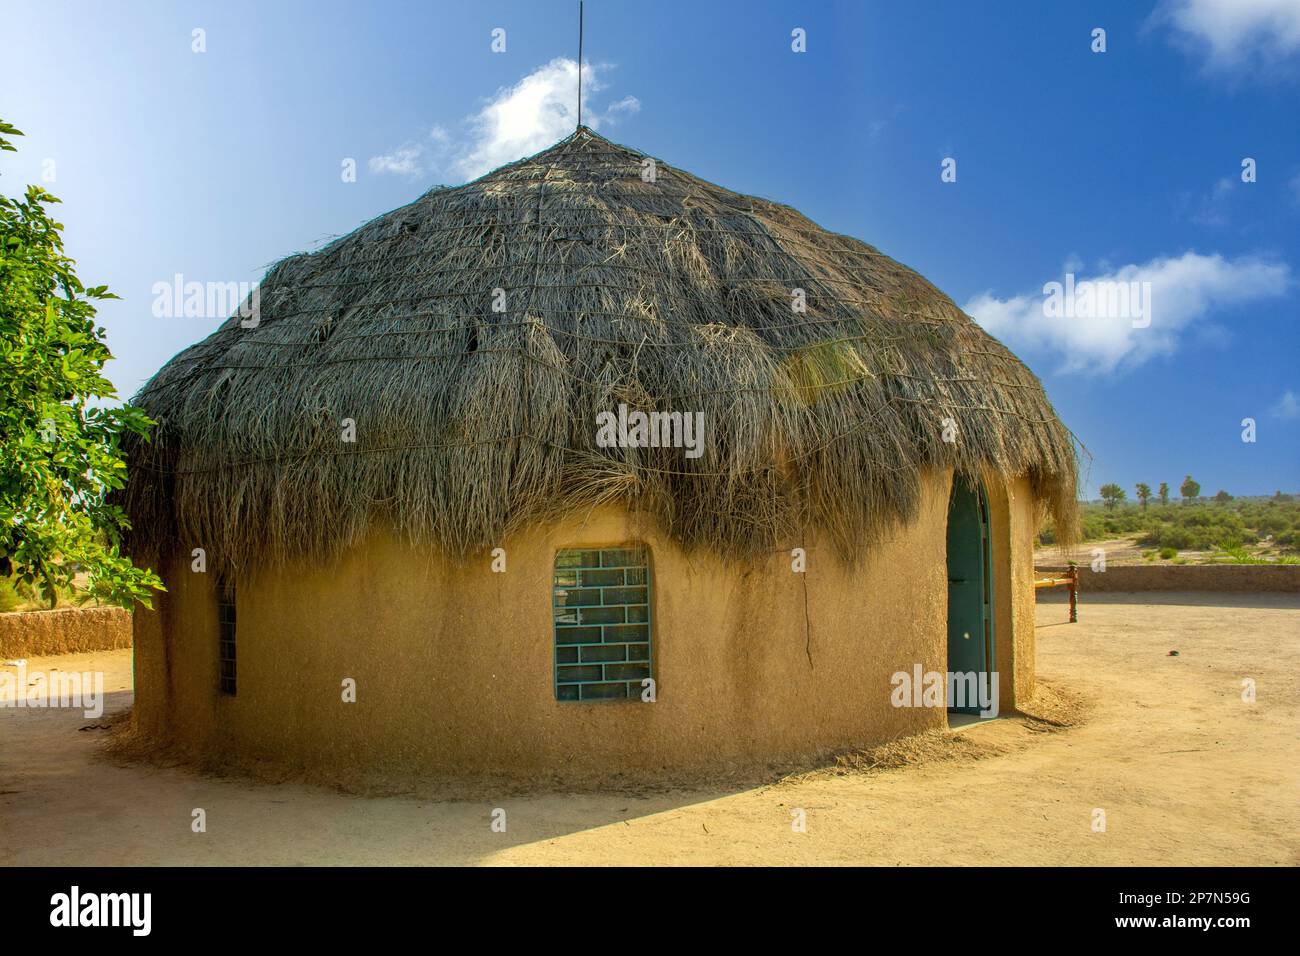 Traditional mud hut house in the Thar desert near the India Pakistan border Stock Photo